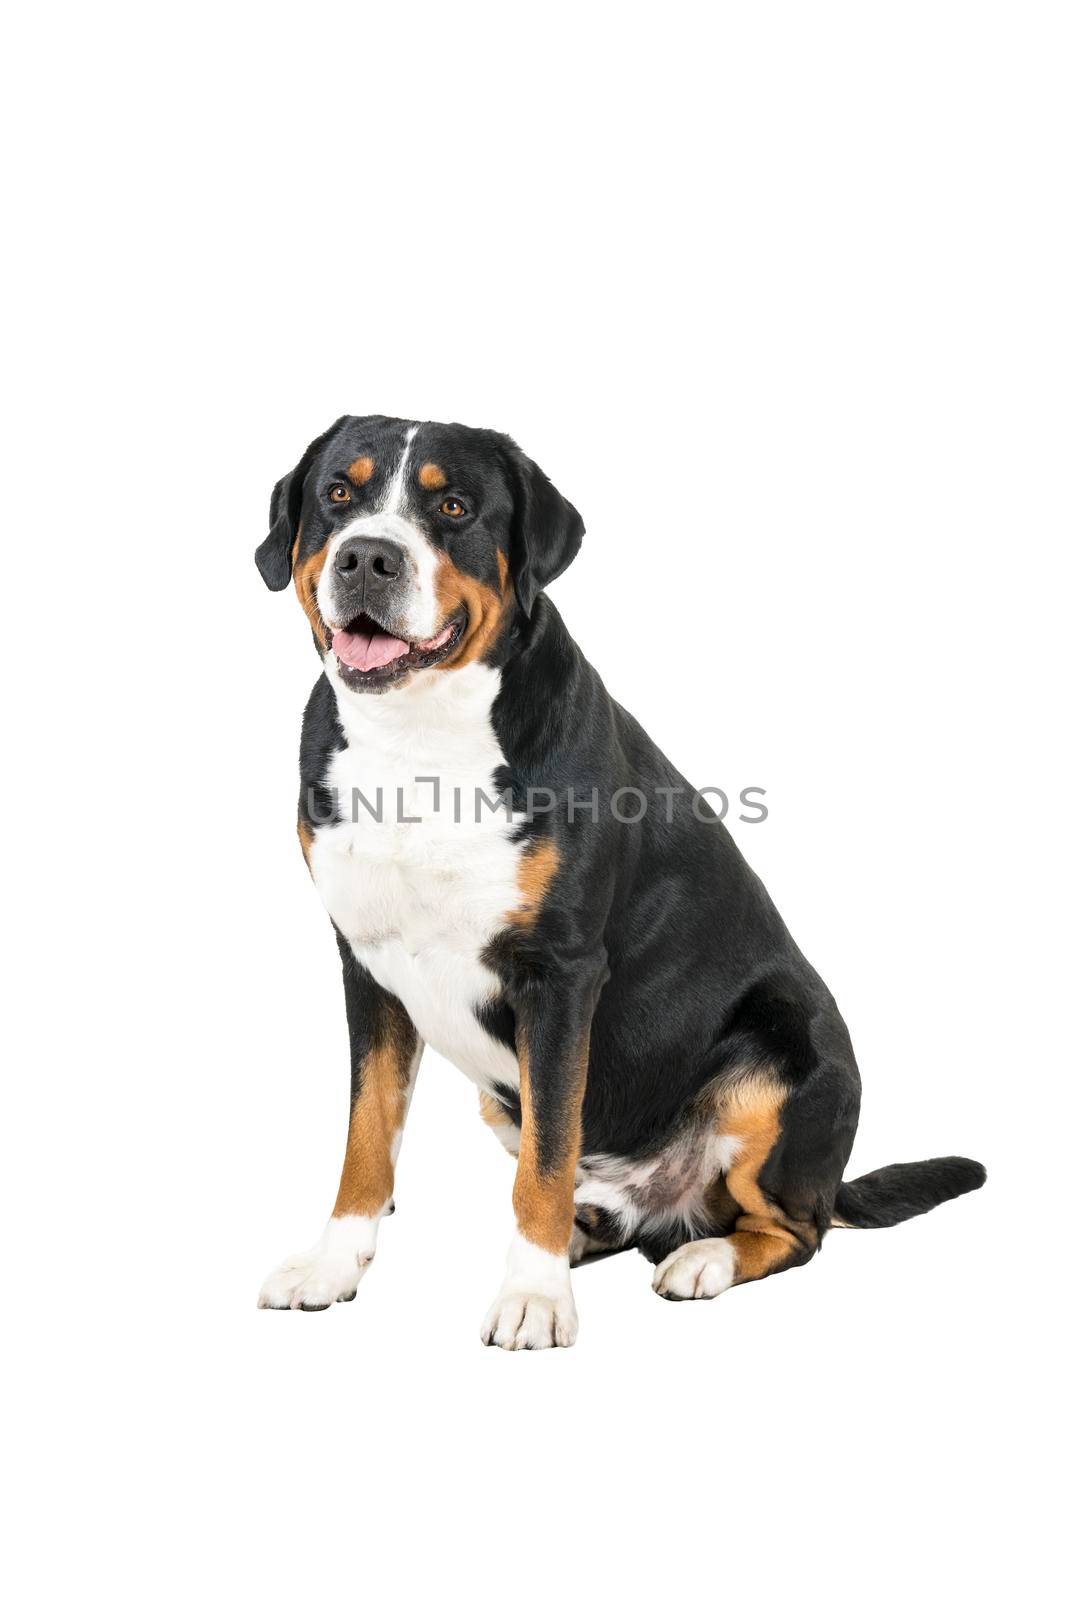 Greater Swiss Mountain Dog sitting side ways and looking next to the camera by LeoniekvanderVliet